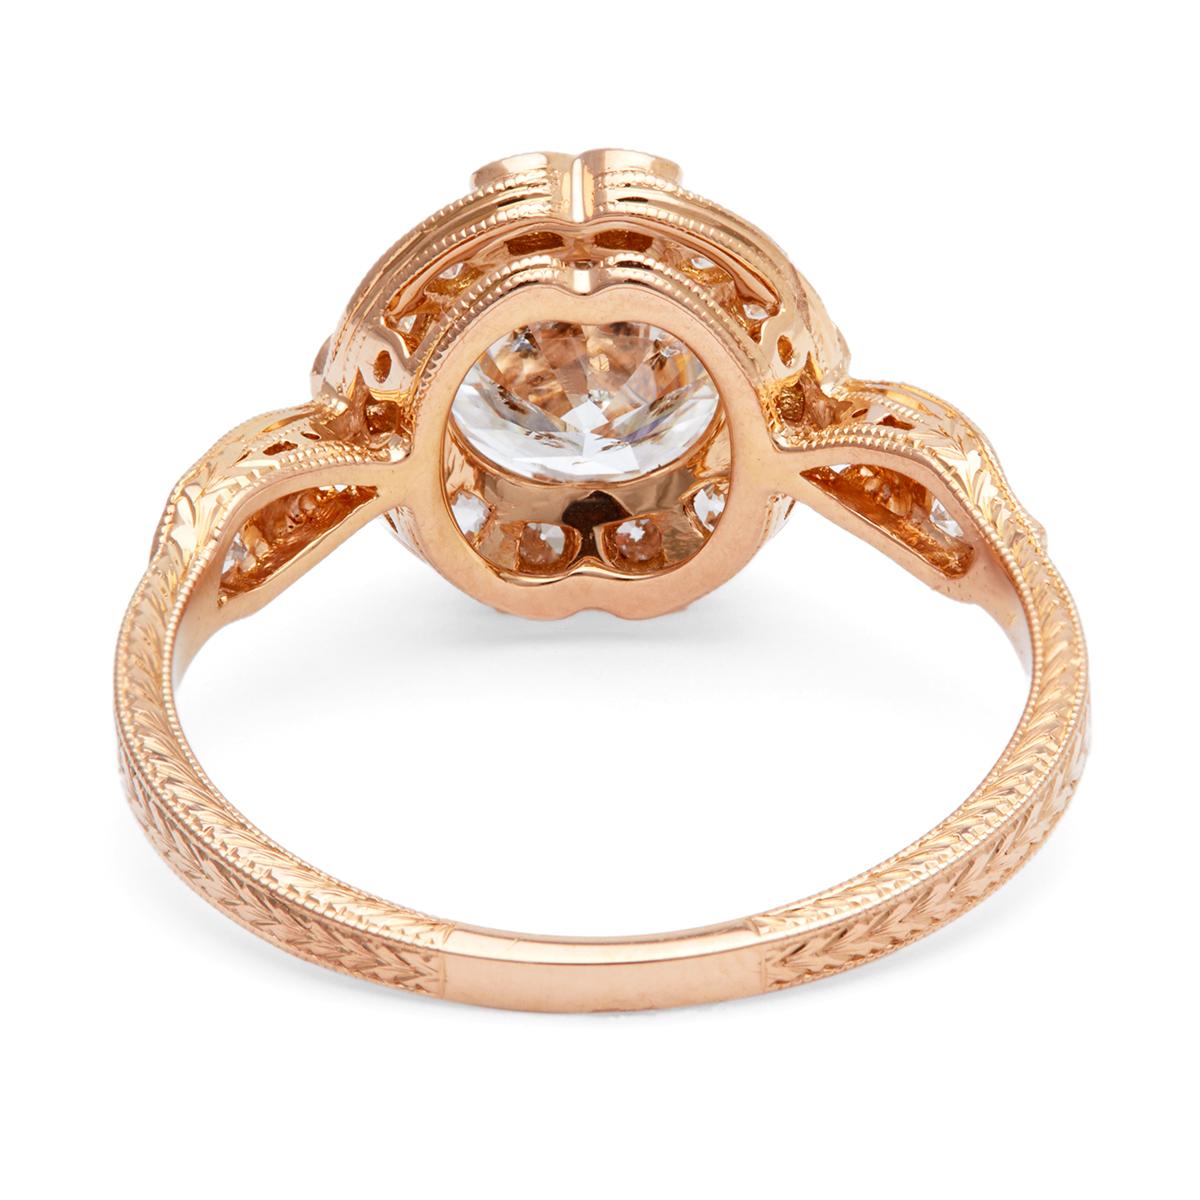 Antique Inspired GIA 1.41 Carats Round Brilliant Cut Diamond 18k Rose Gold Ring For Sale 2